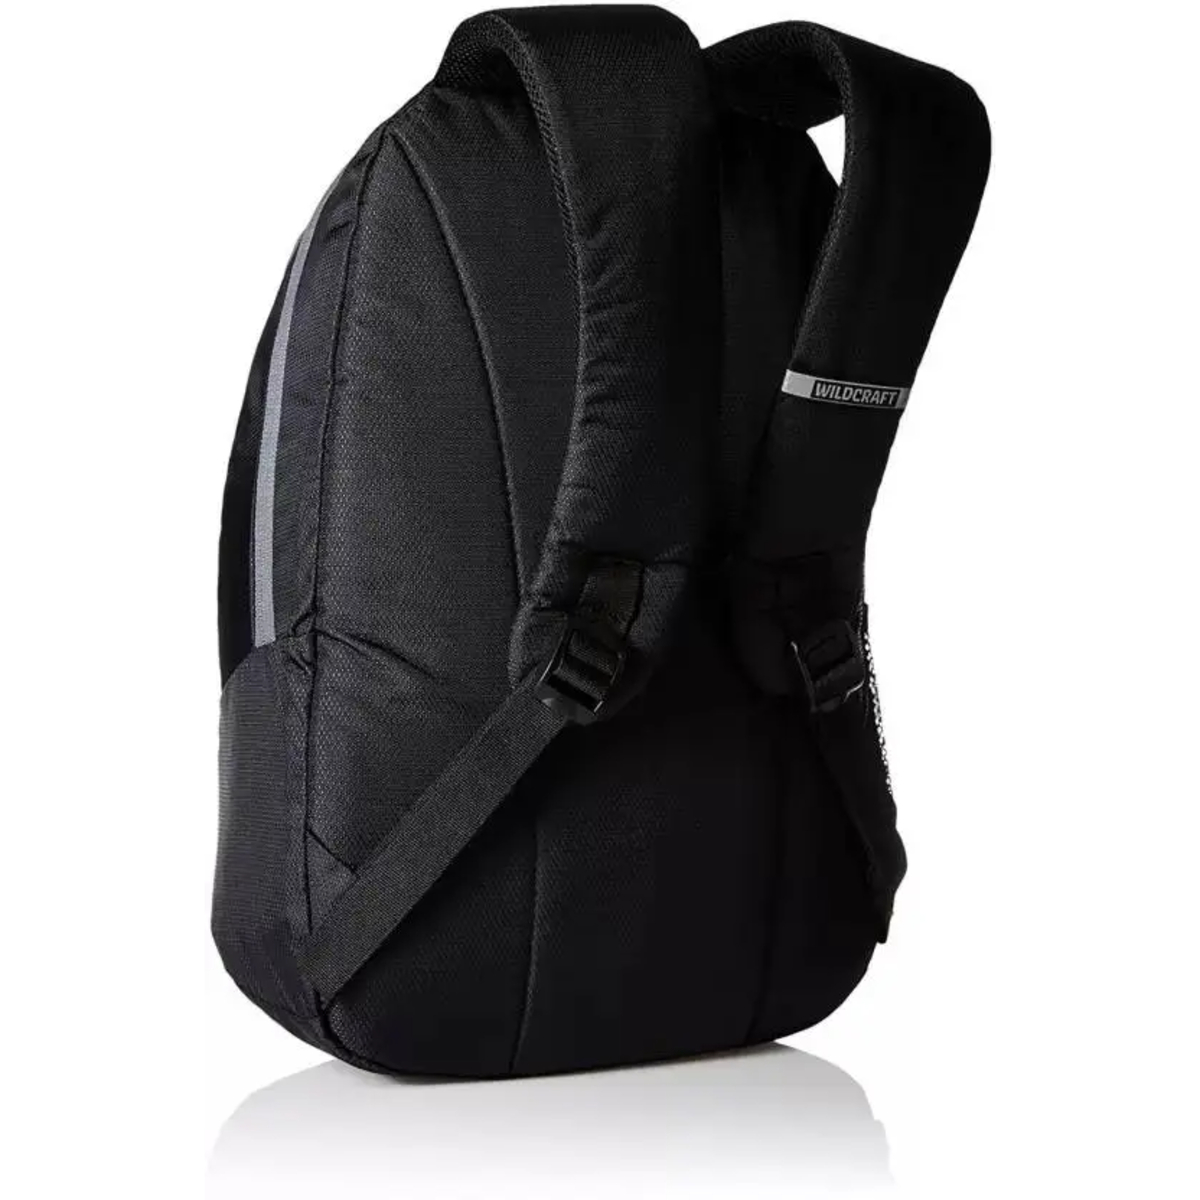 Wildcraft Ace2 Laptop Backpack, 18 Inches, Black